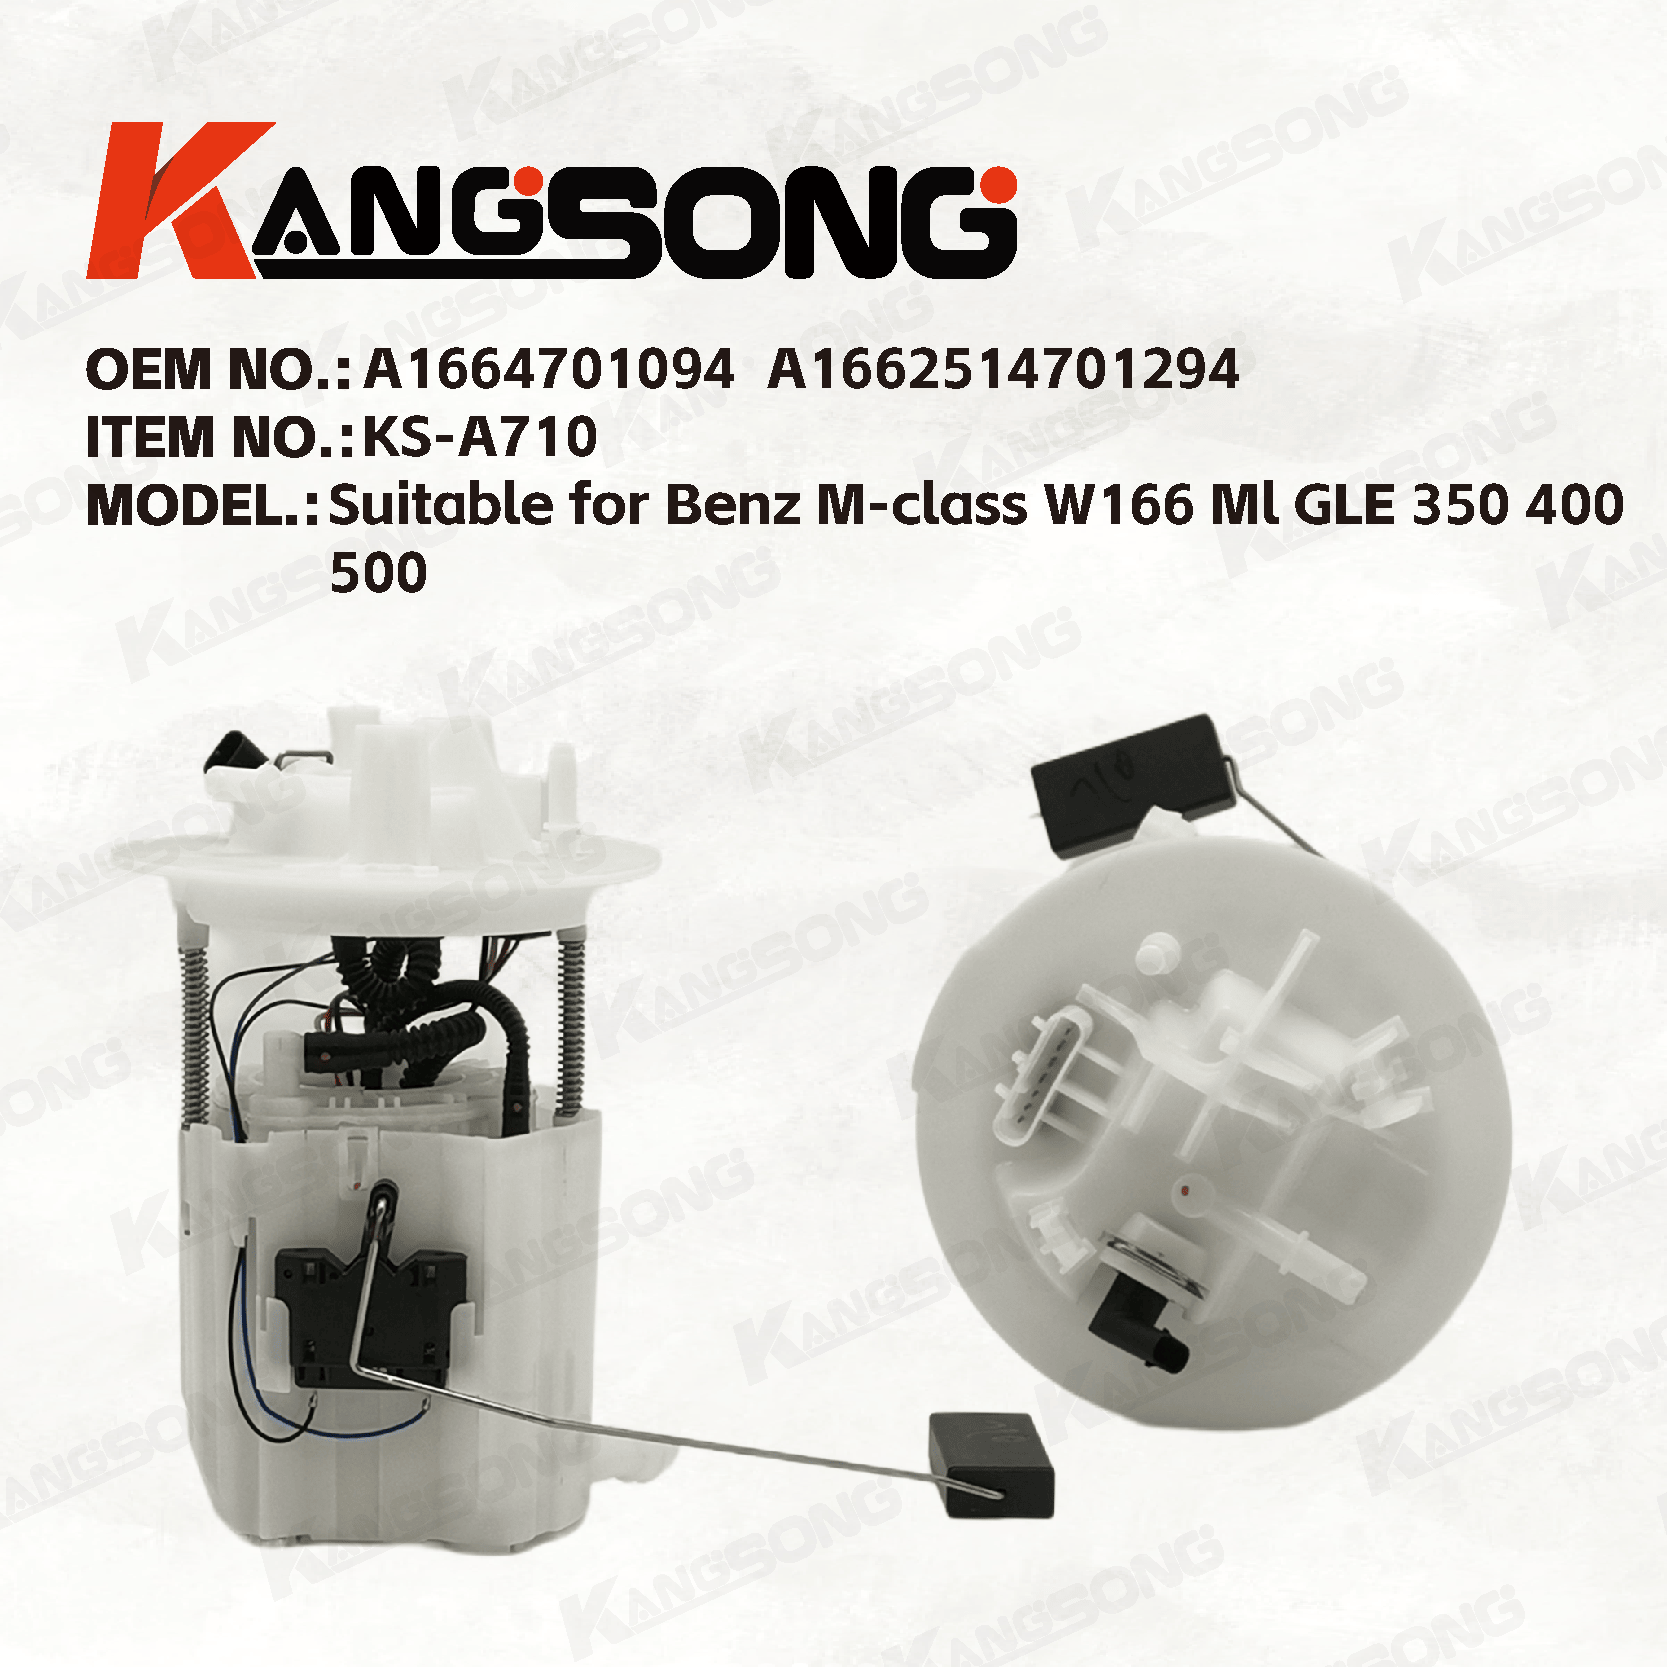 Applicable to Mercedes-Benz M-class W166 Ml GLE 350 400 500\A166 470 1094\A166 251 470 1294 \Fuel Pump Assembly/KS-A710